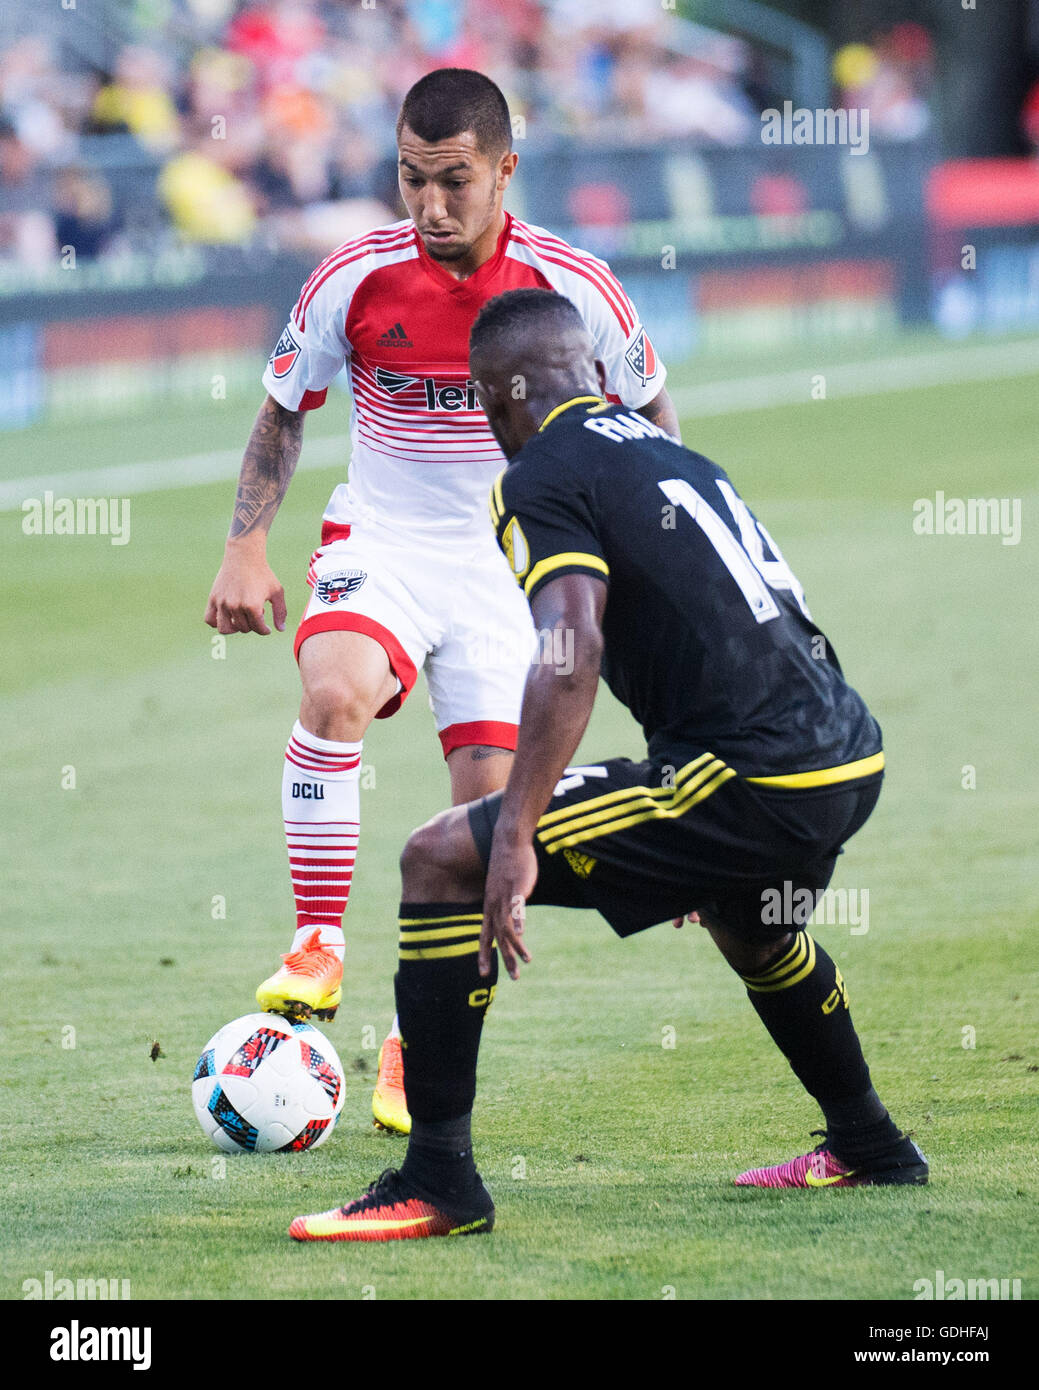 Columbus, U.S.A. 16th July, 2016. July 16, 2016: D.C. United midfielder Luciano Acosta (11) goes one on one with Columbus Crew SC defender Waylon Francis (14). Columbus, Ohio, USA. (Brent Clark/Alamy Live News) Stock Photo